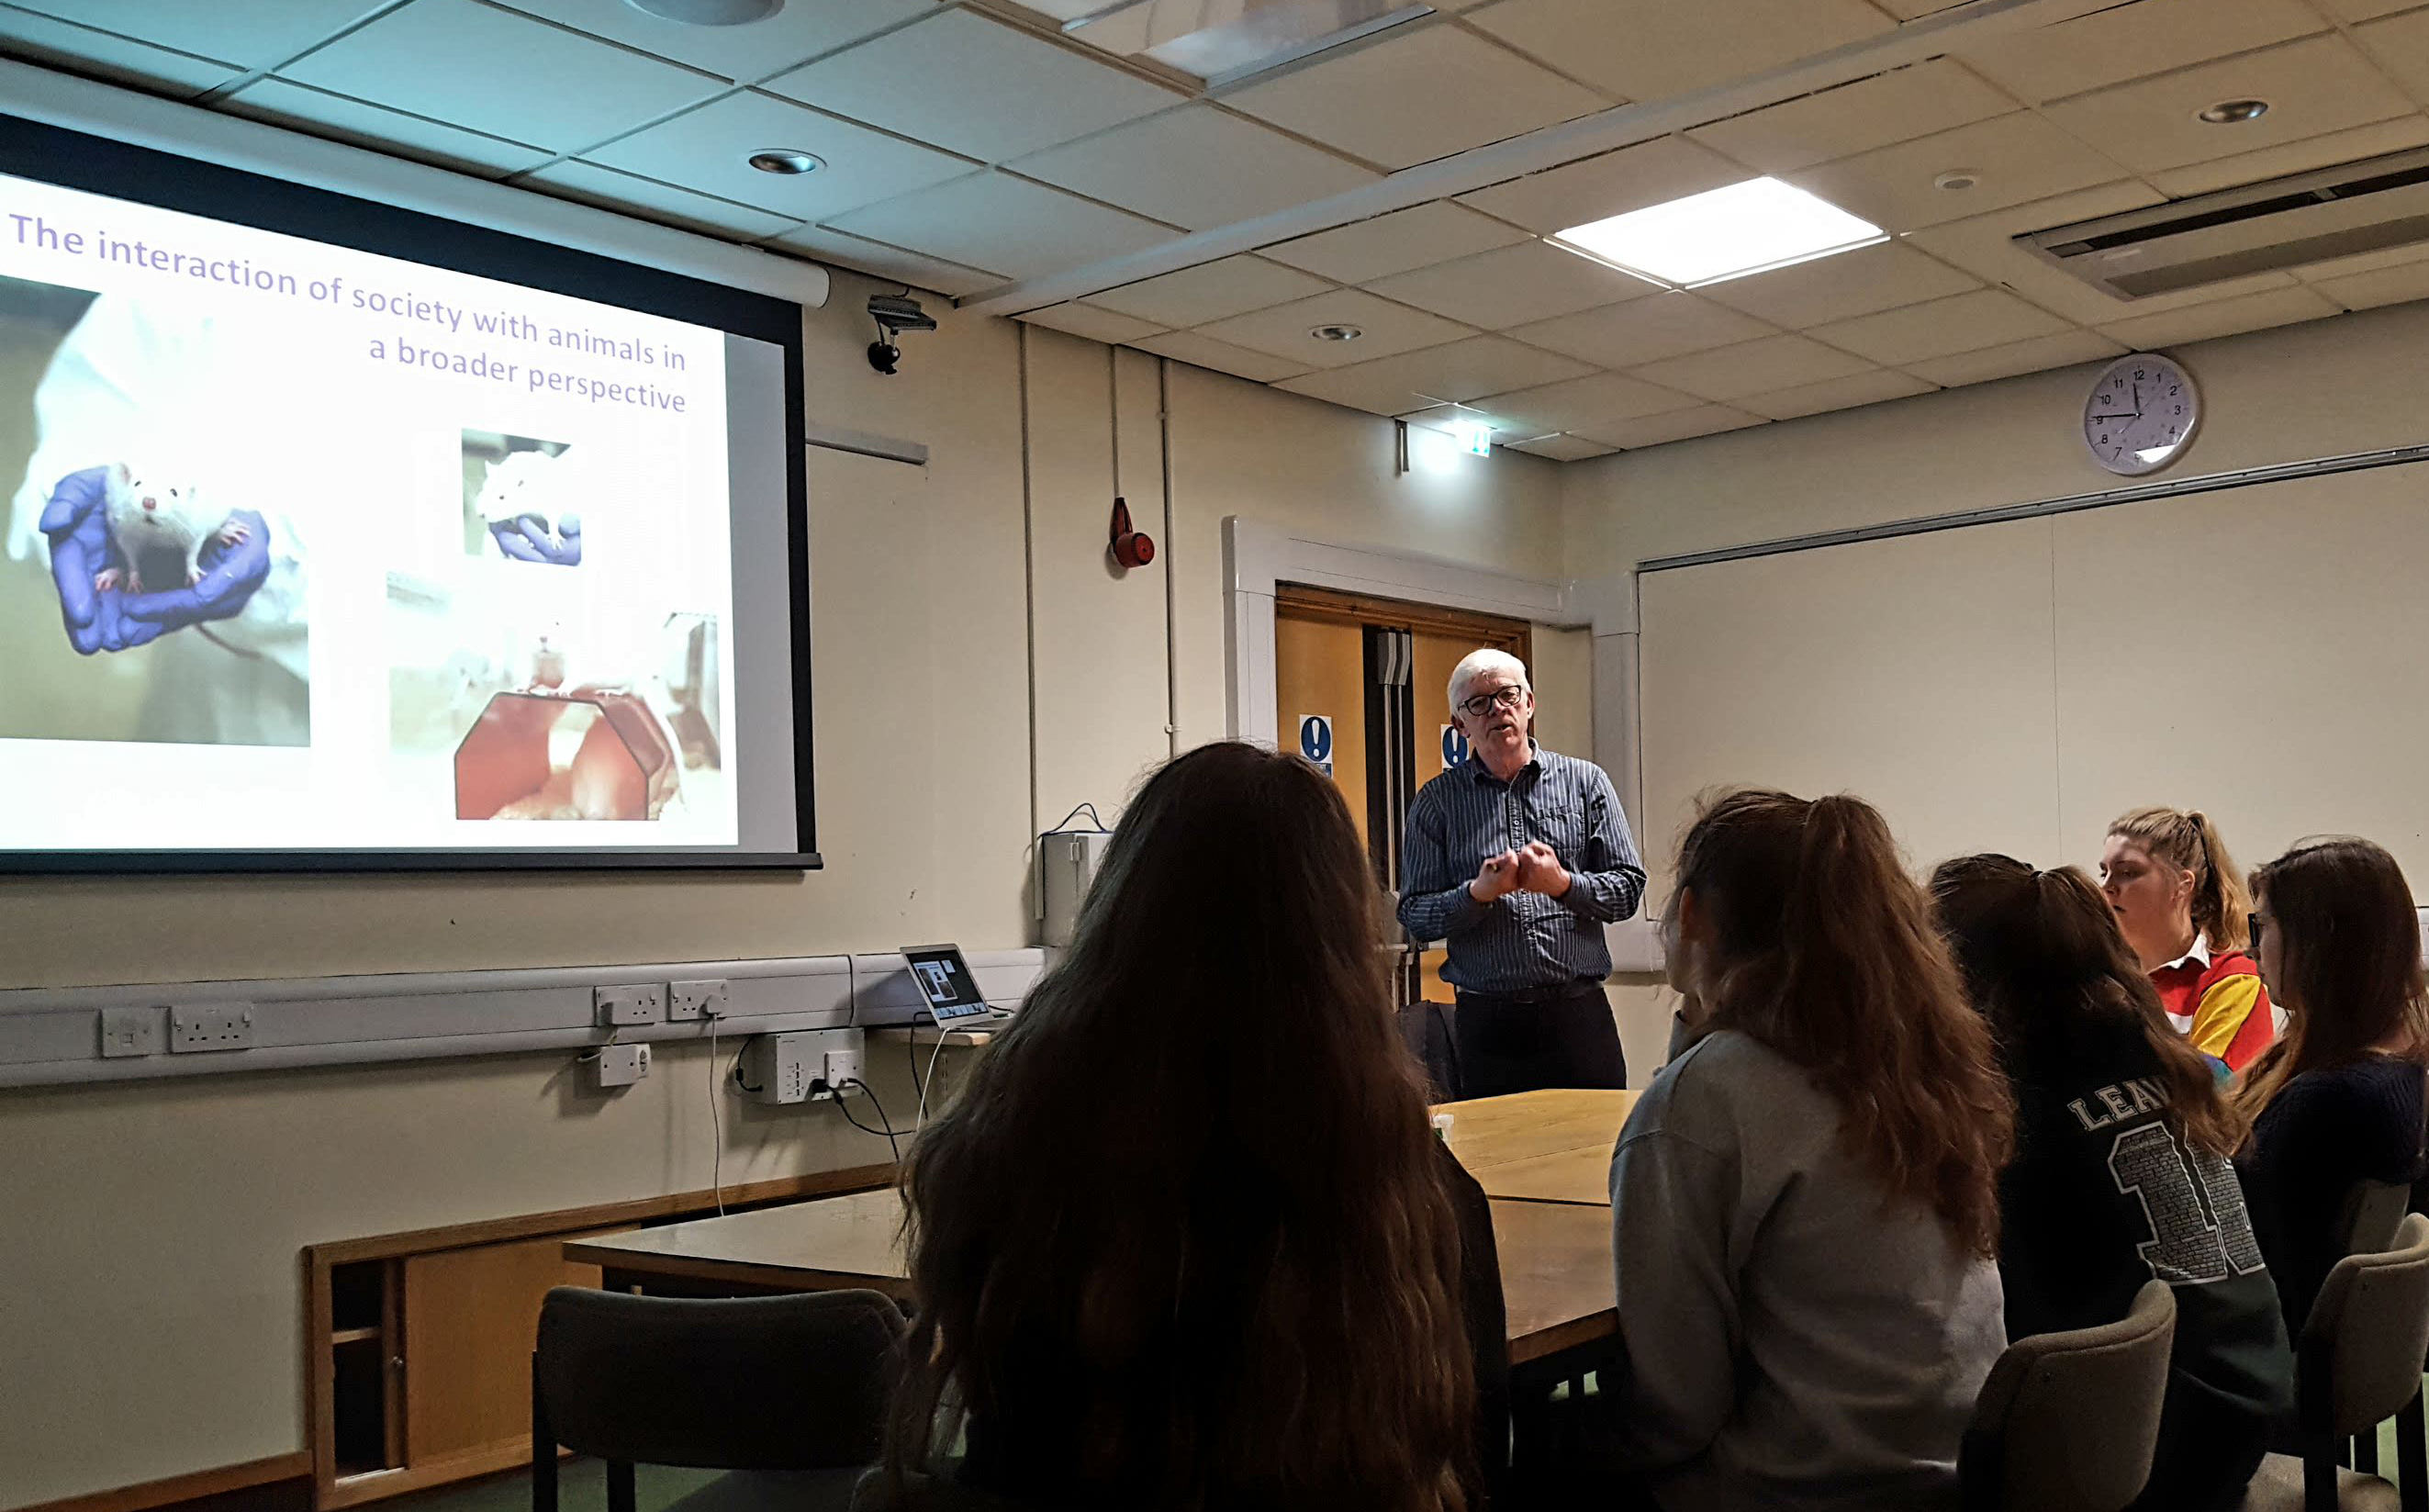 Pupils in small groups talked informally to Unit members about key concepts and challenges in brain research. Here, Professor Paul Bolam moderates discussion on the use of animals in research.